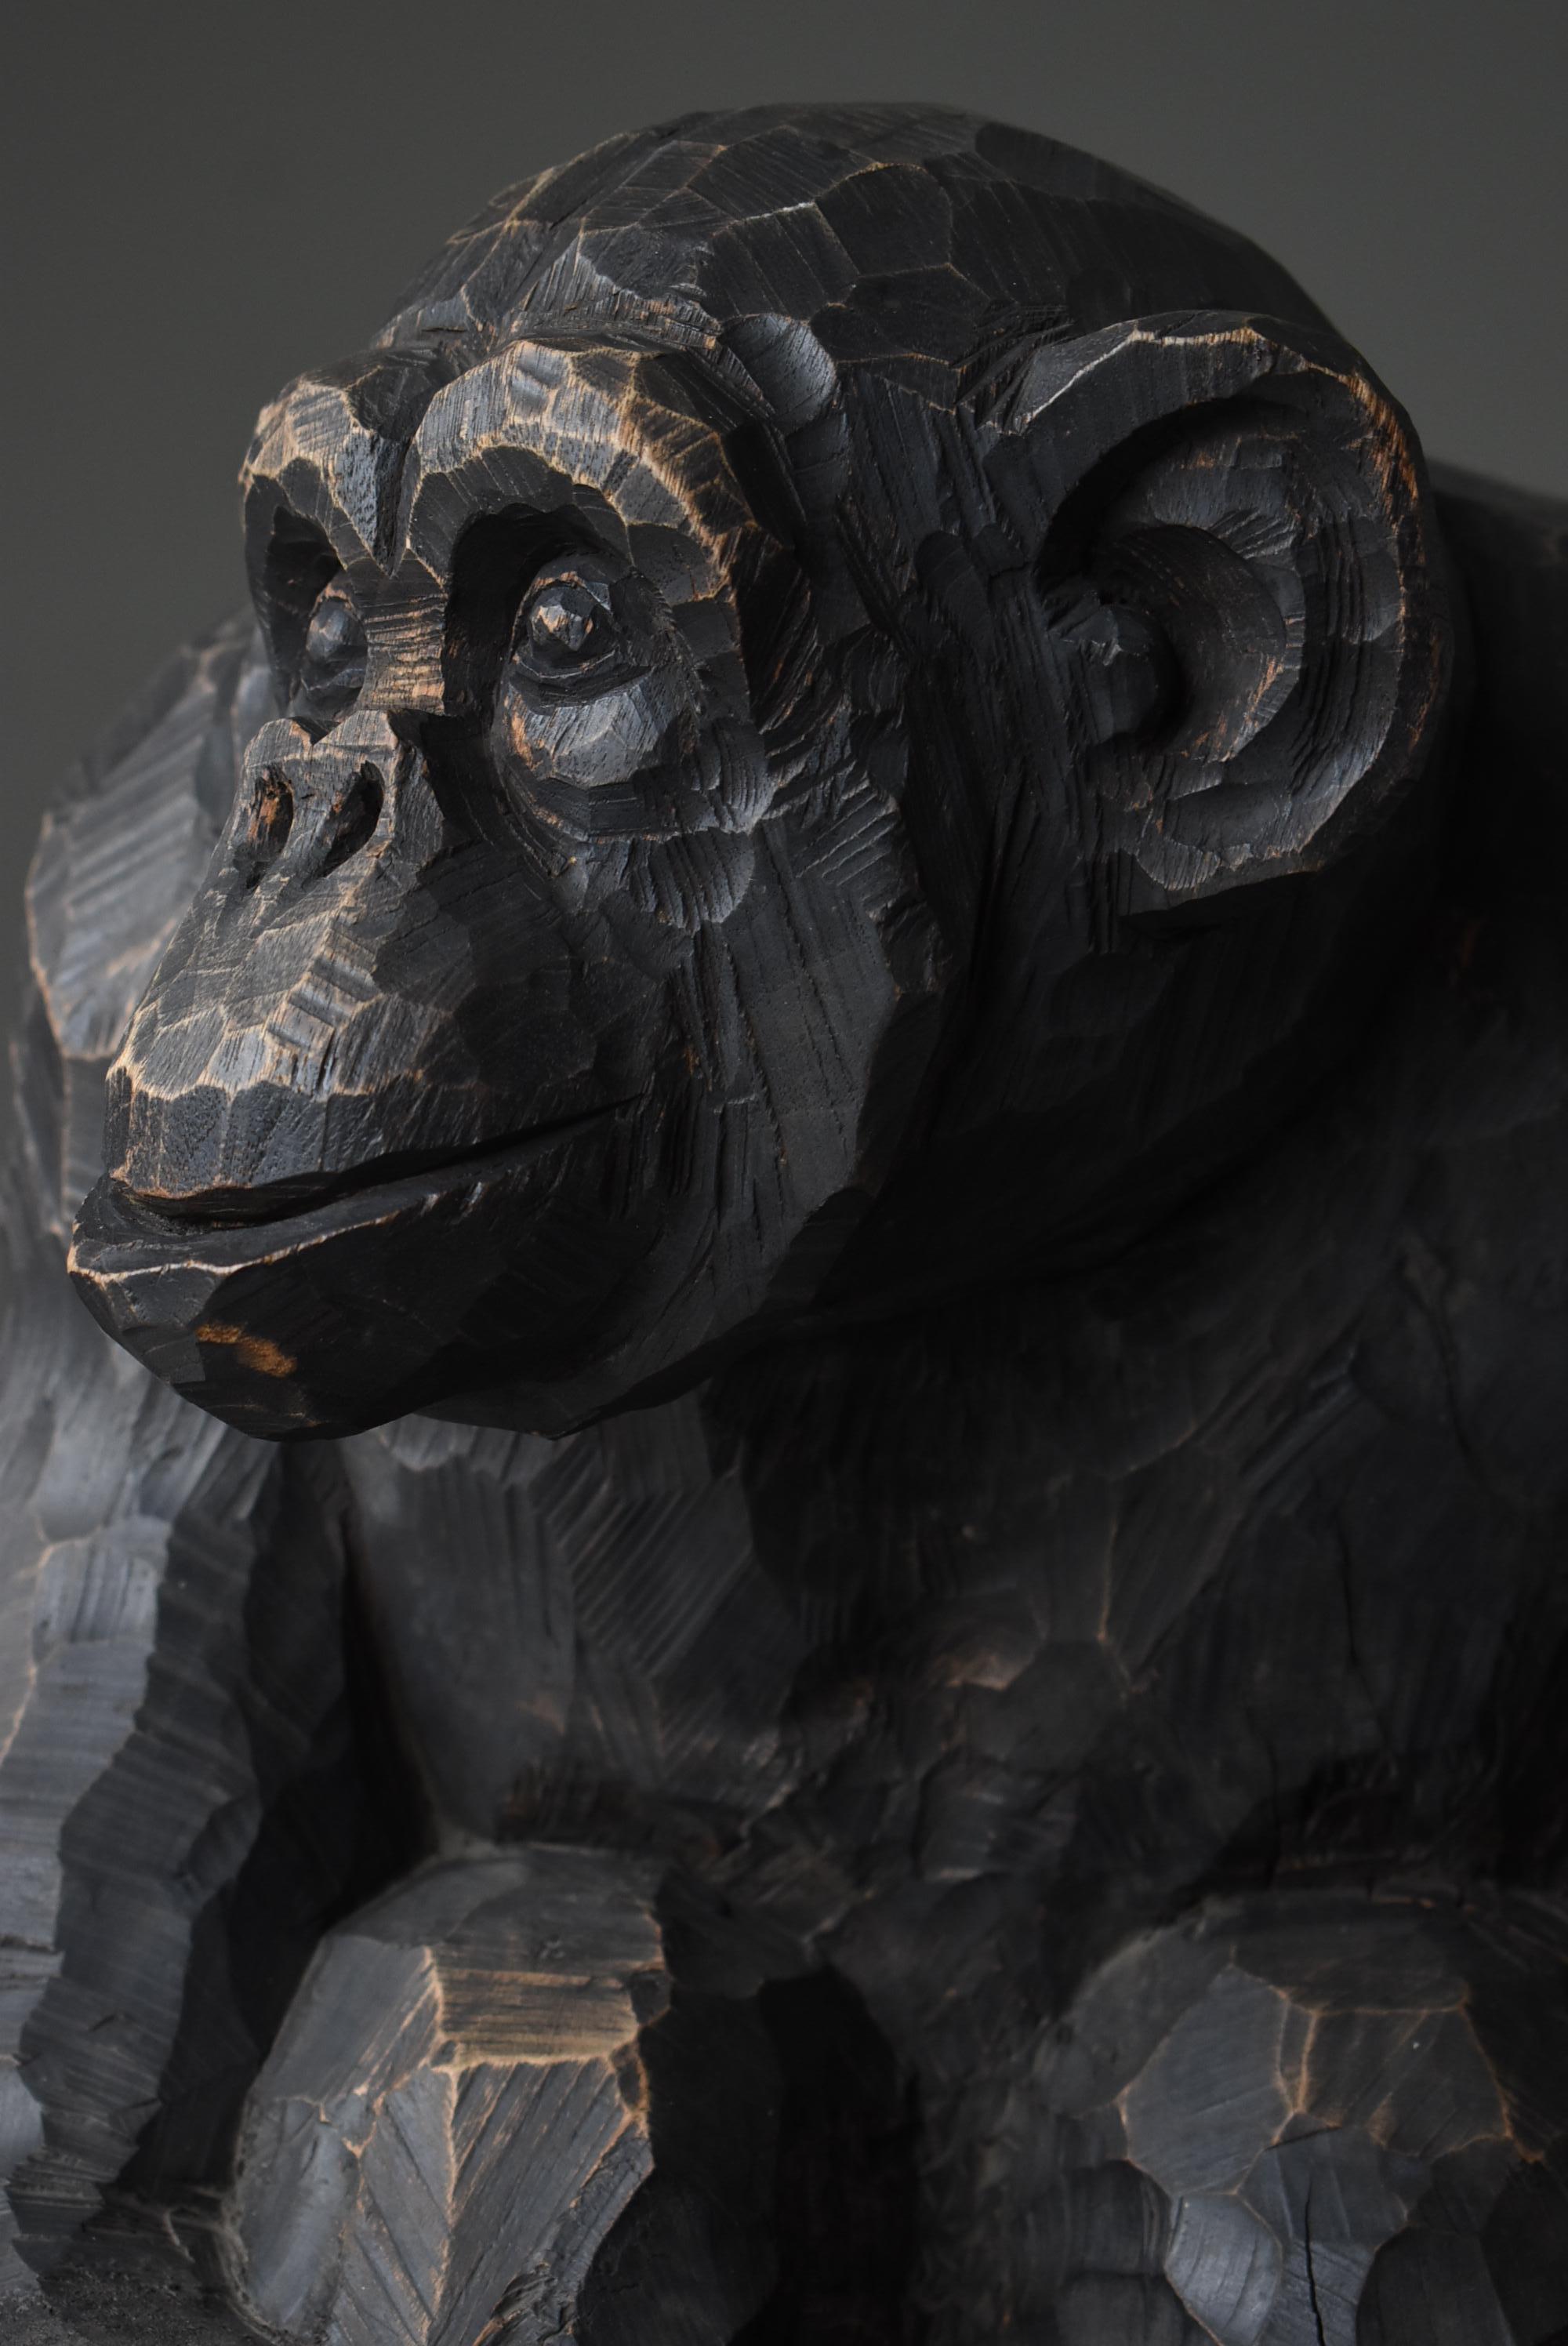 Mid-20th Century Japanese Old Wood Sculpture Chimpanzee 1940s-1960s / Wood Carving Mingei  For Sale